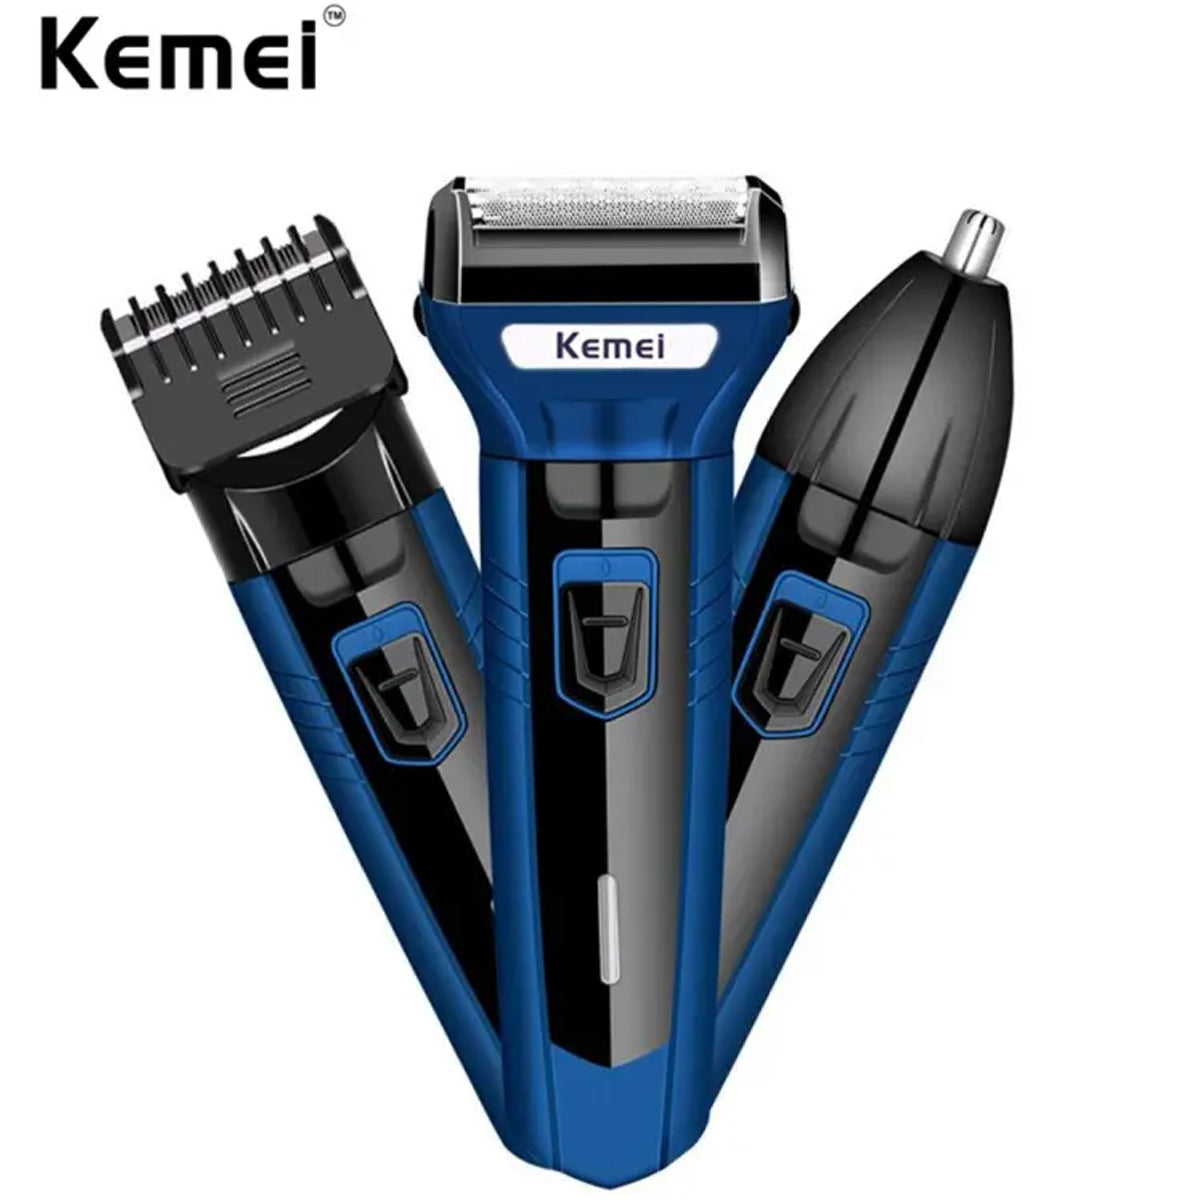 badgeKemei KM-6330 3 in 1 Professional Hair Trimmer Super Grooming Kit Shaver Clipper Nose Trimmer